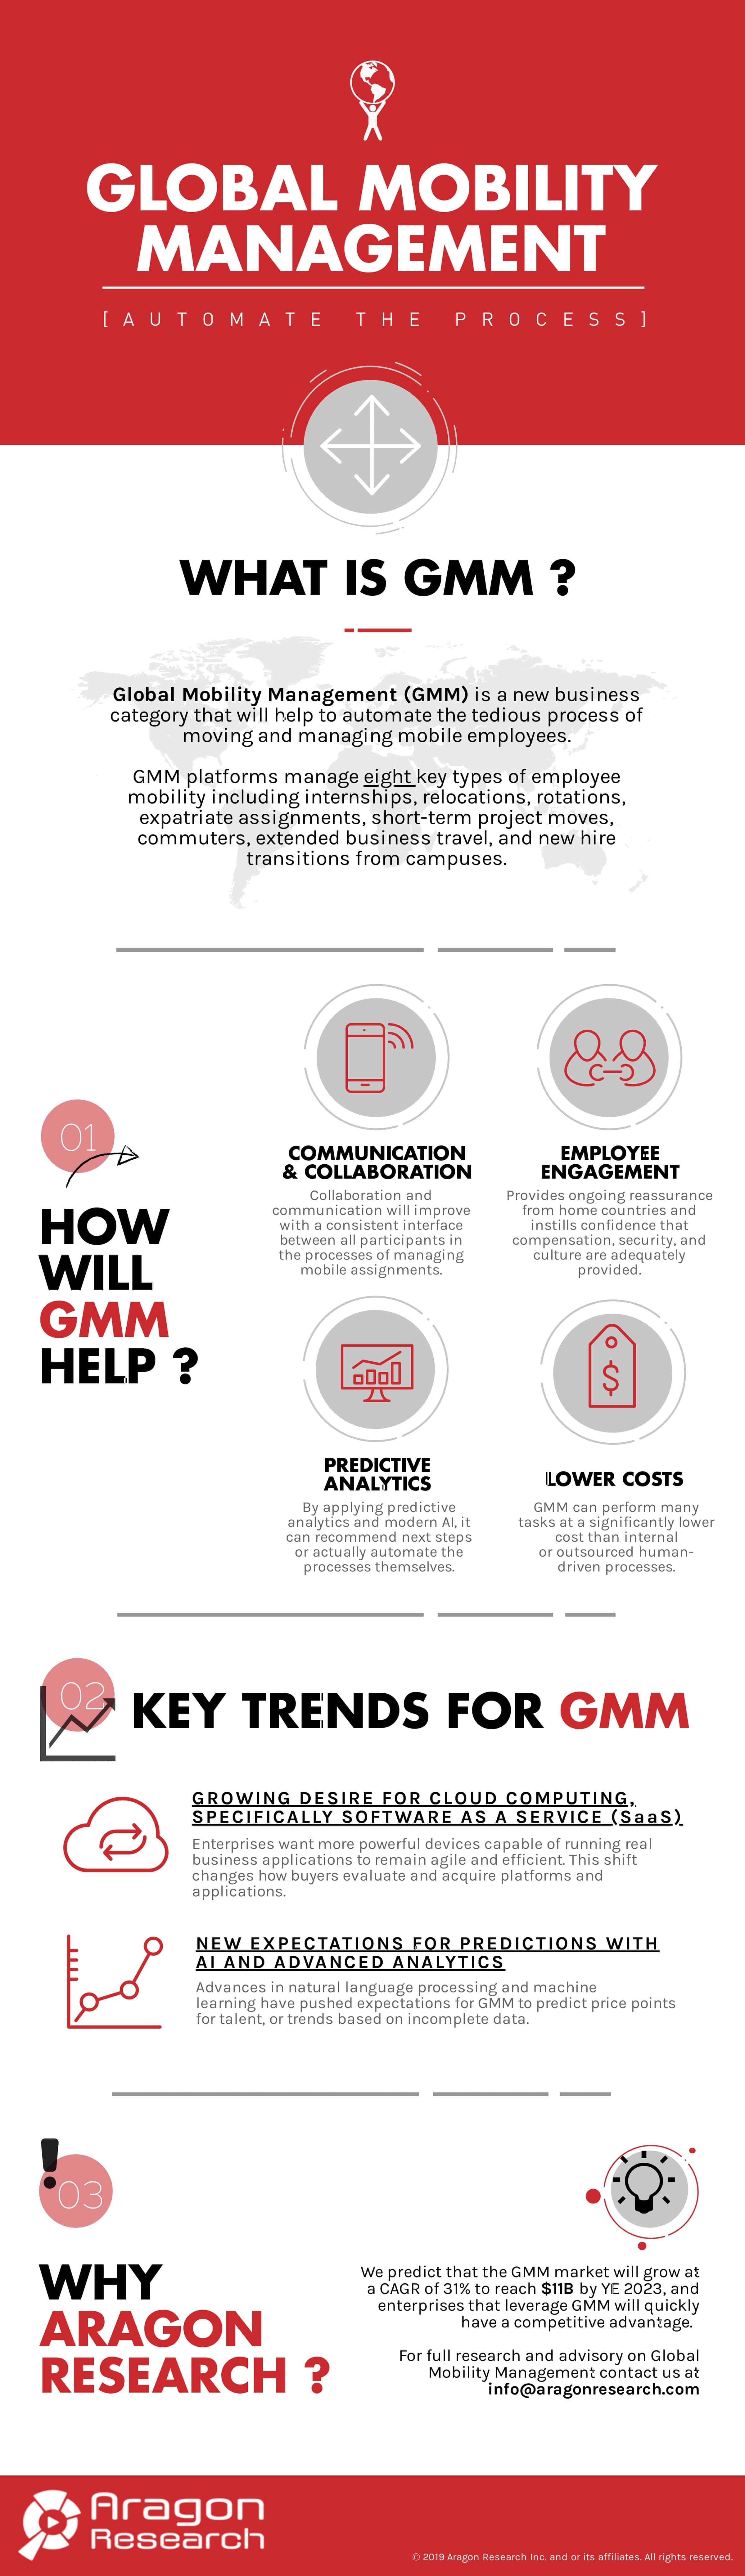 Global Mobility Management - [Infographic] Global Mobility Management